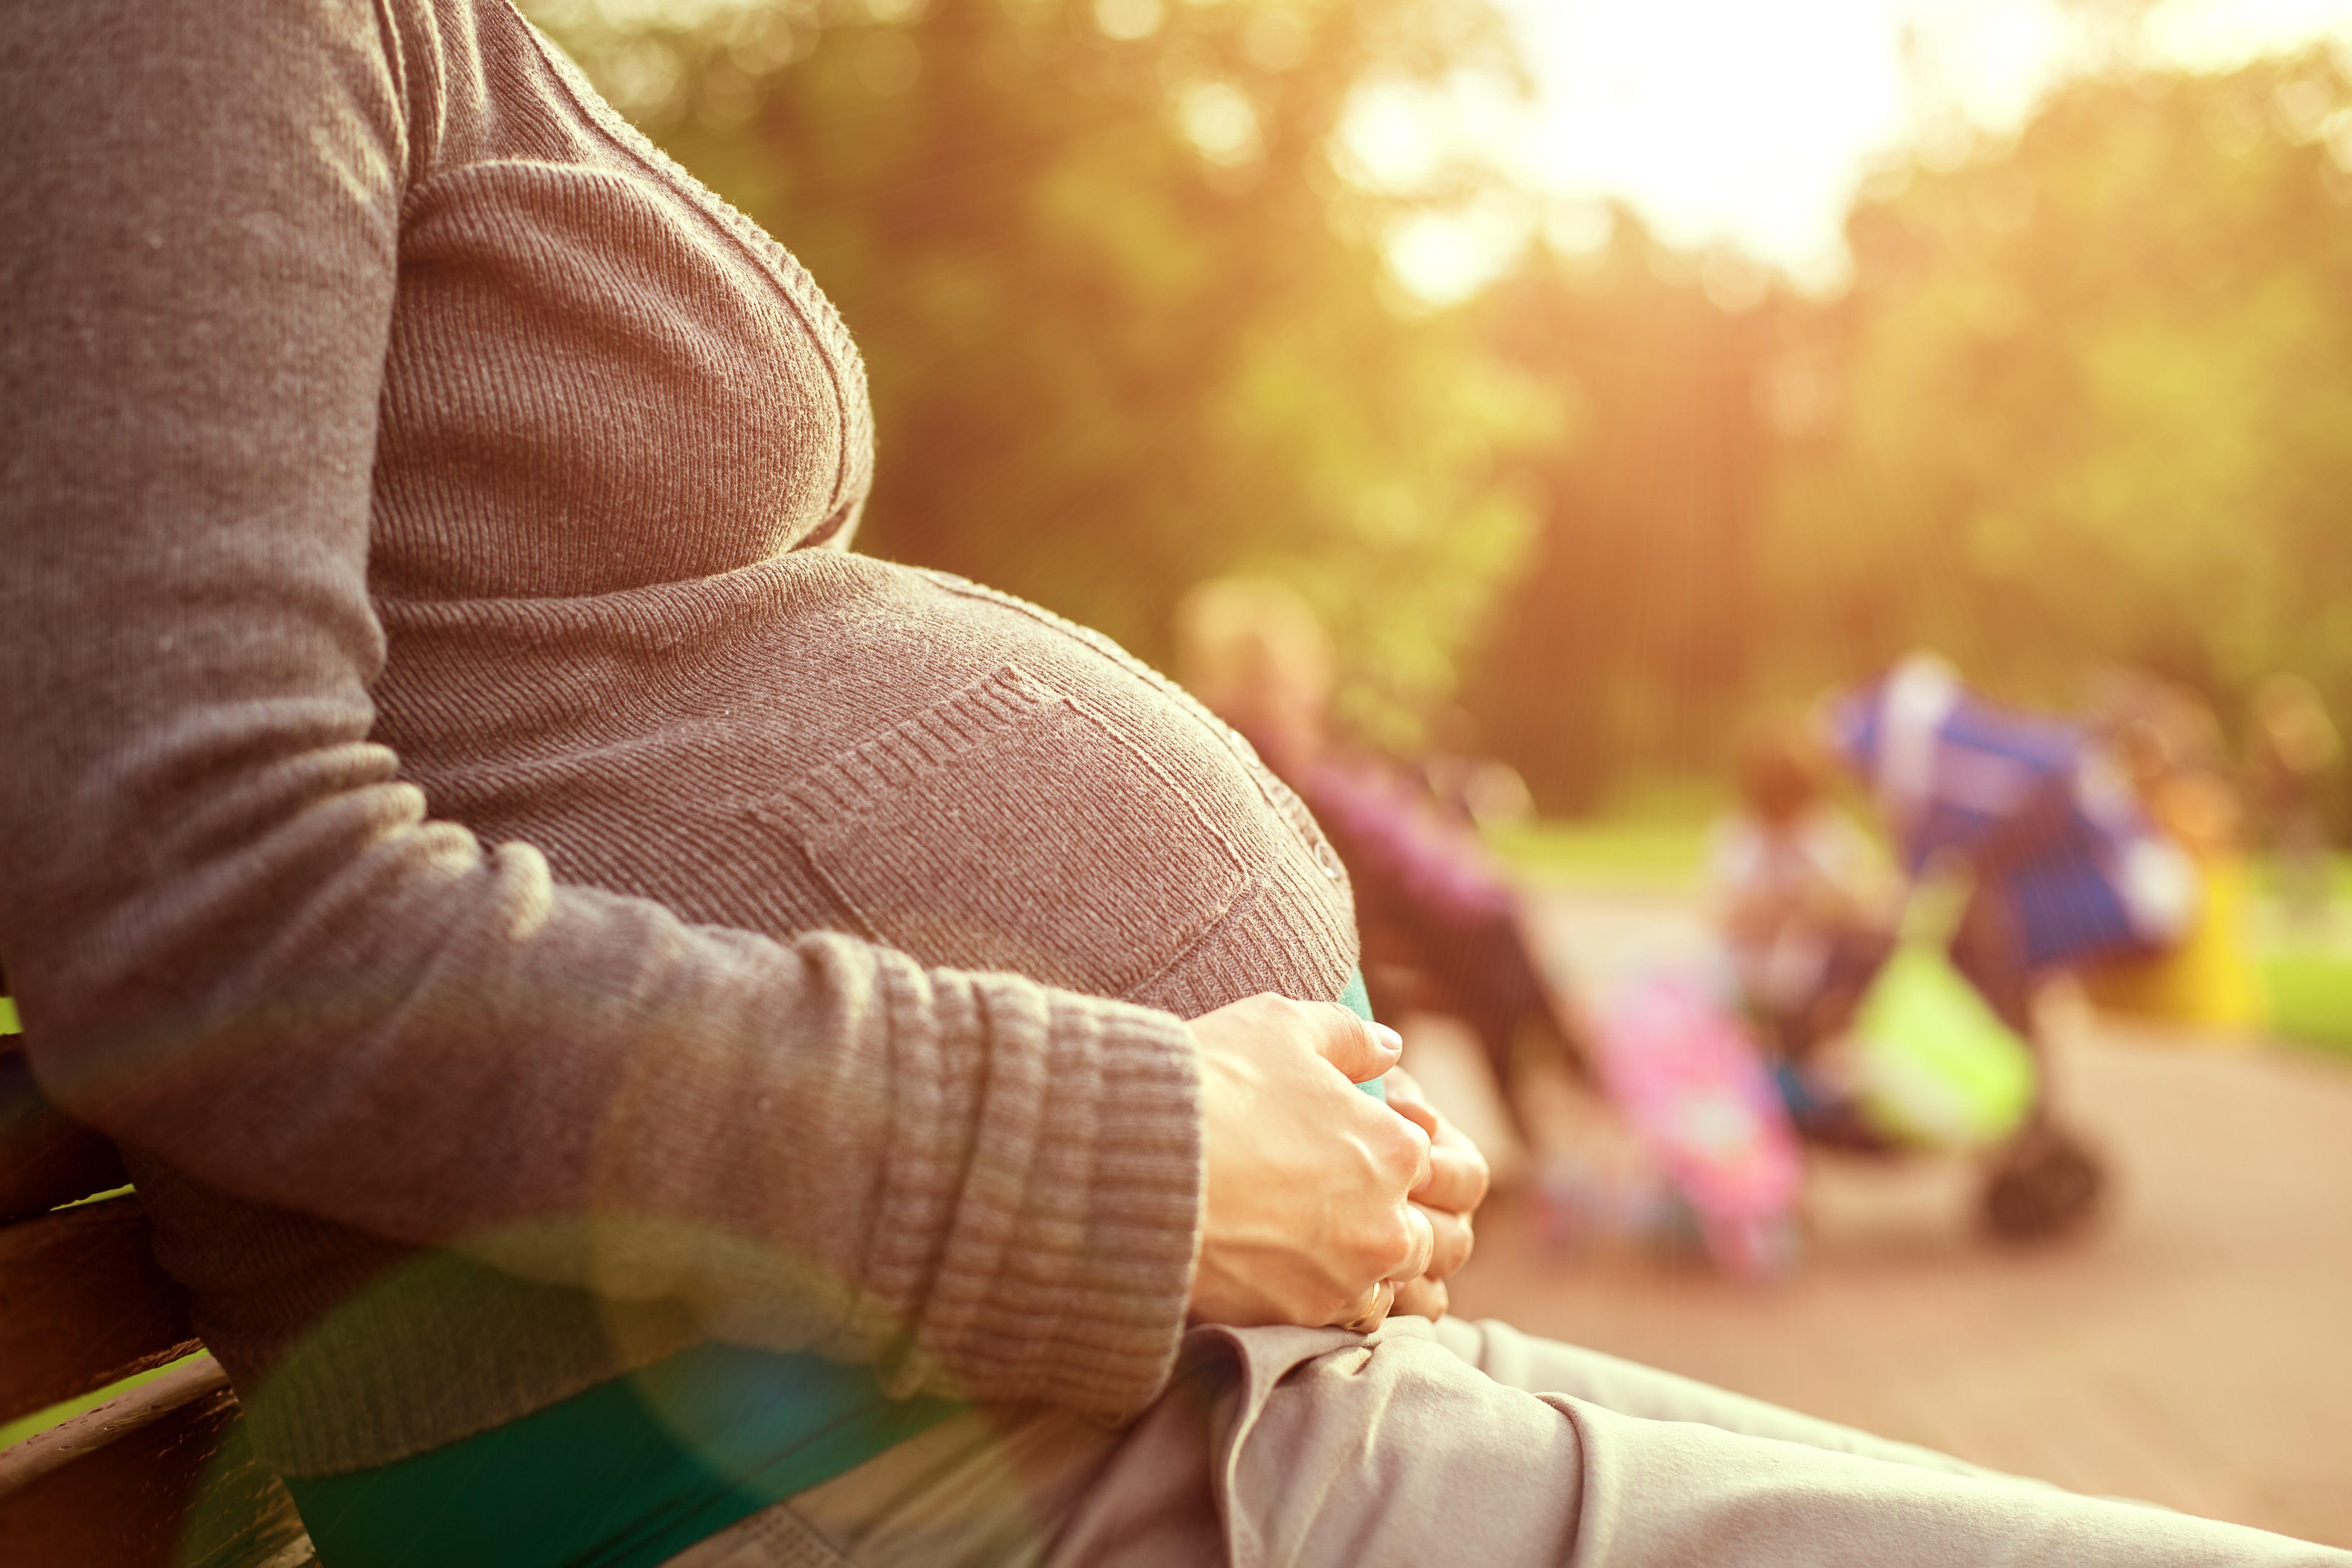 Pregnant woman sitting at the park. | Source: Shutterstock